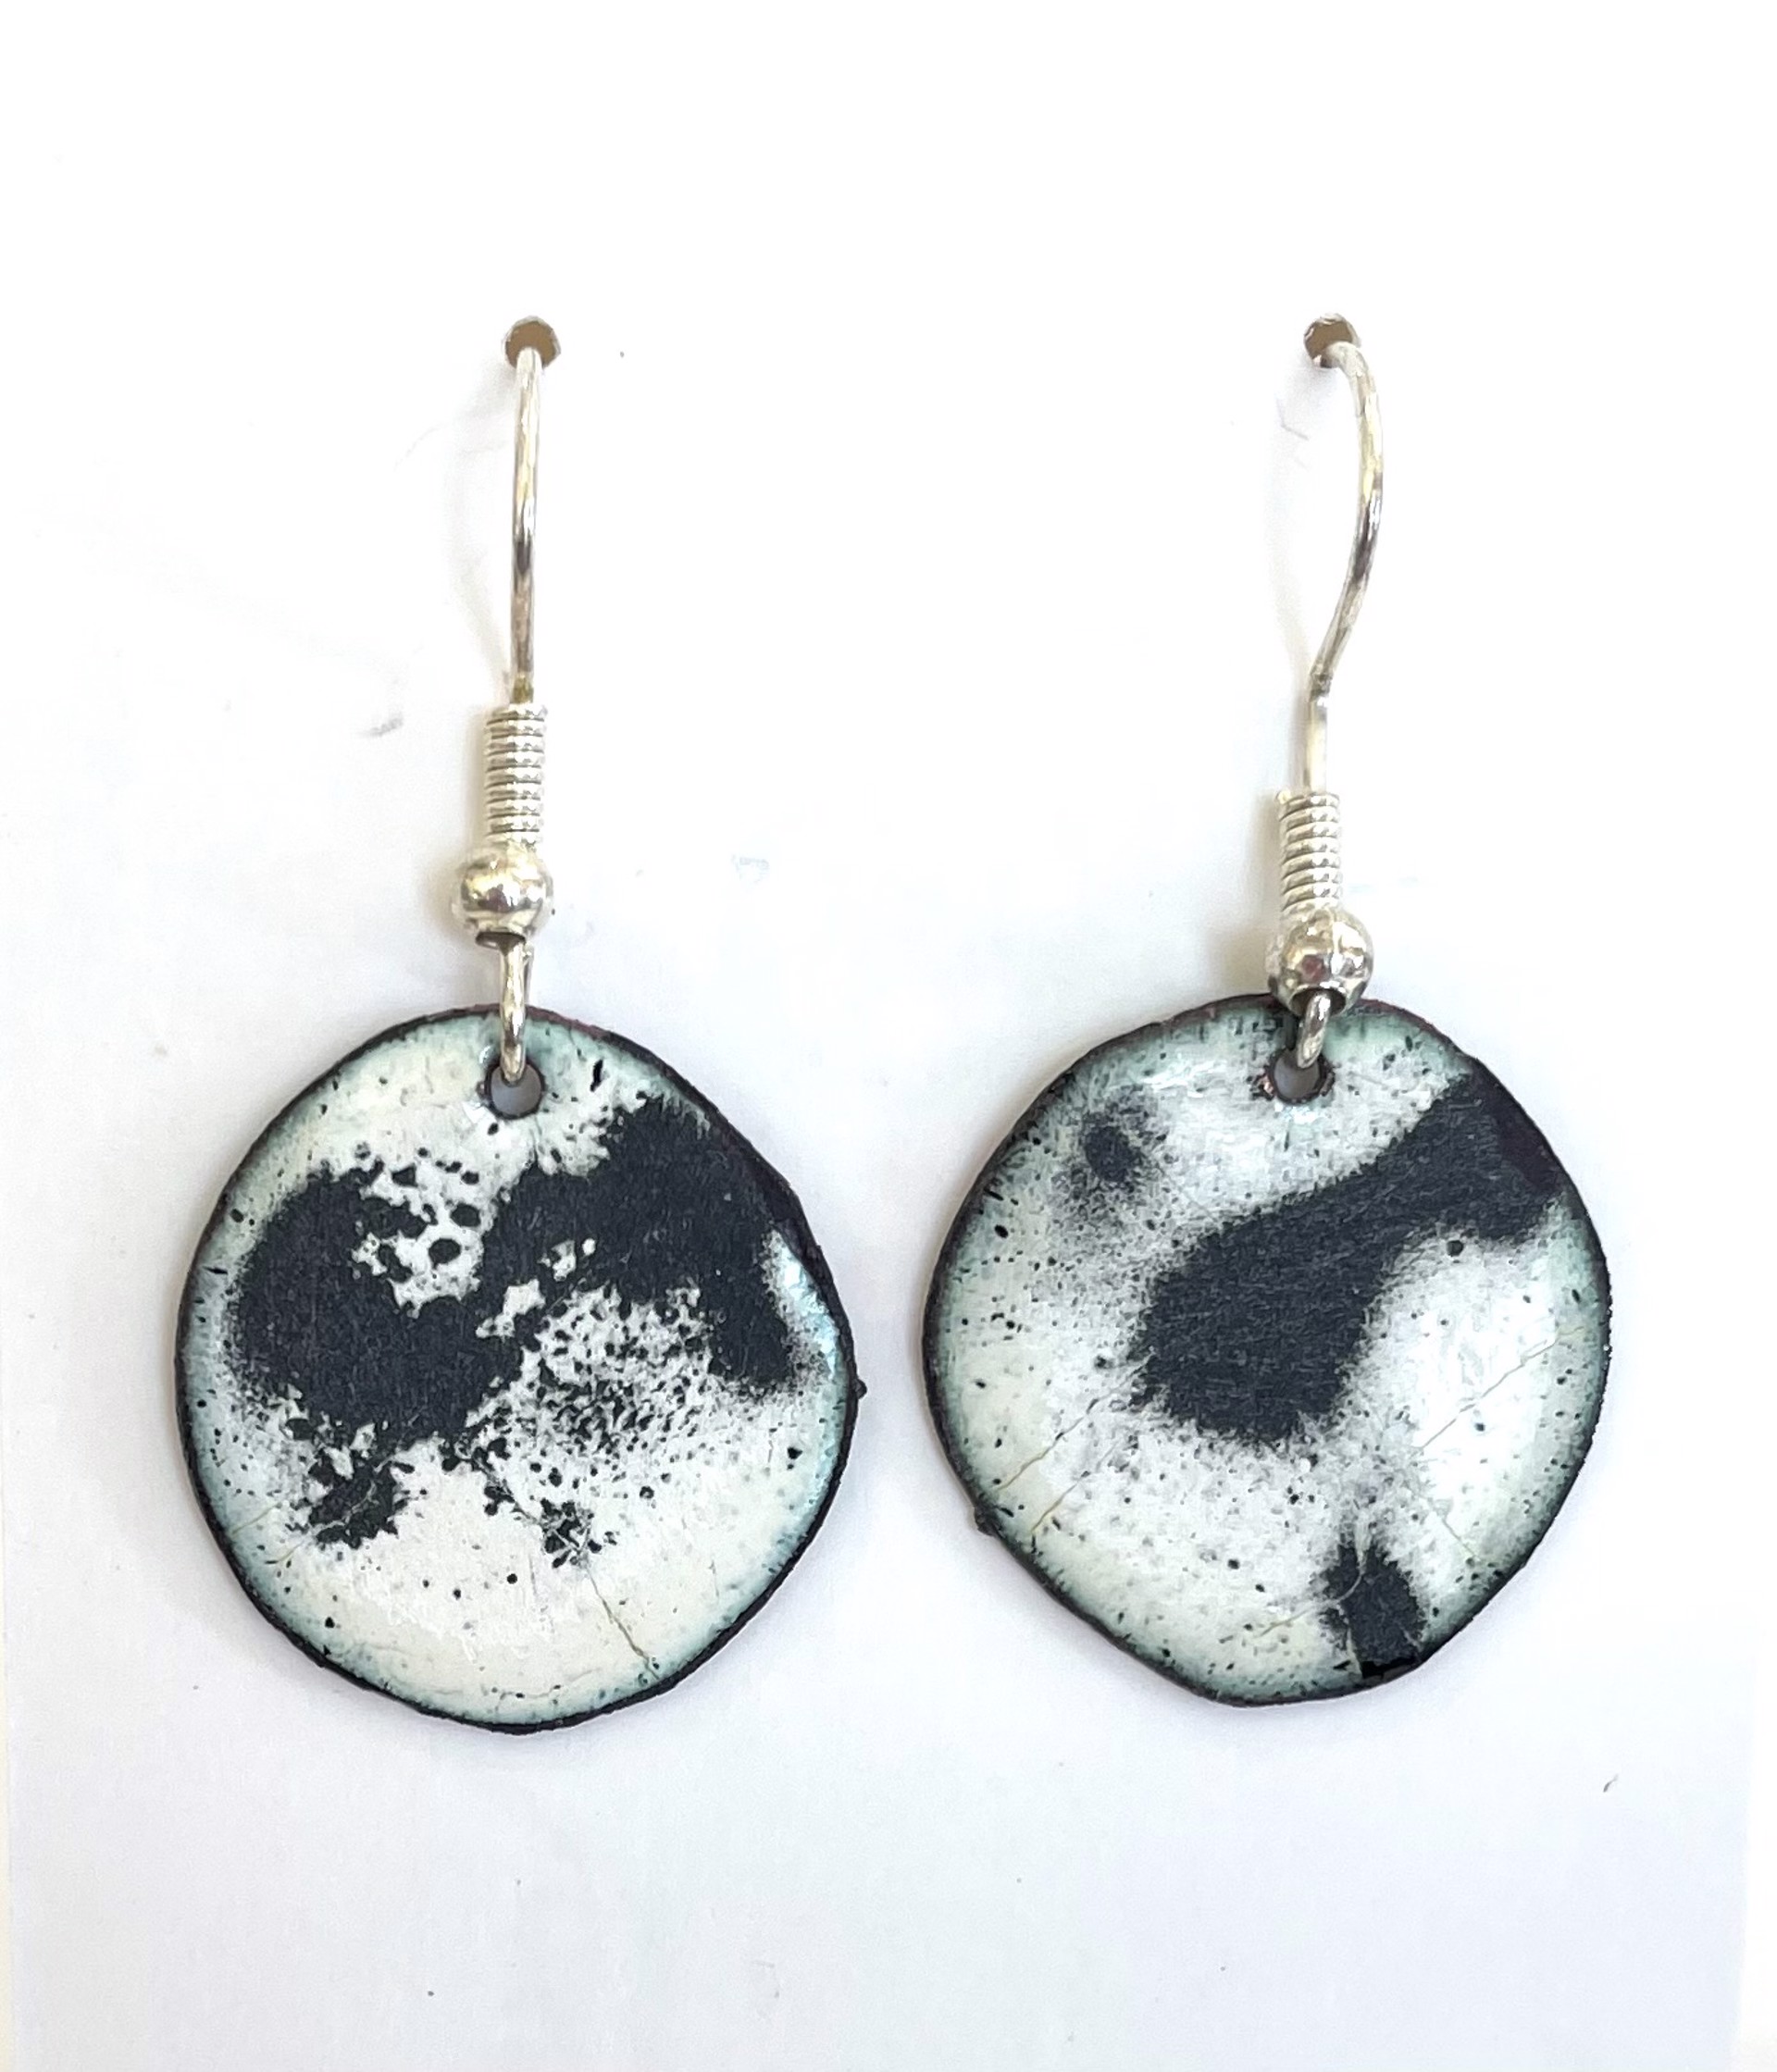 12.4 Abstract White and Black Earrings by Cathy Talbot